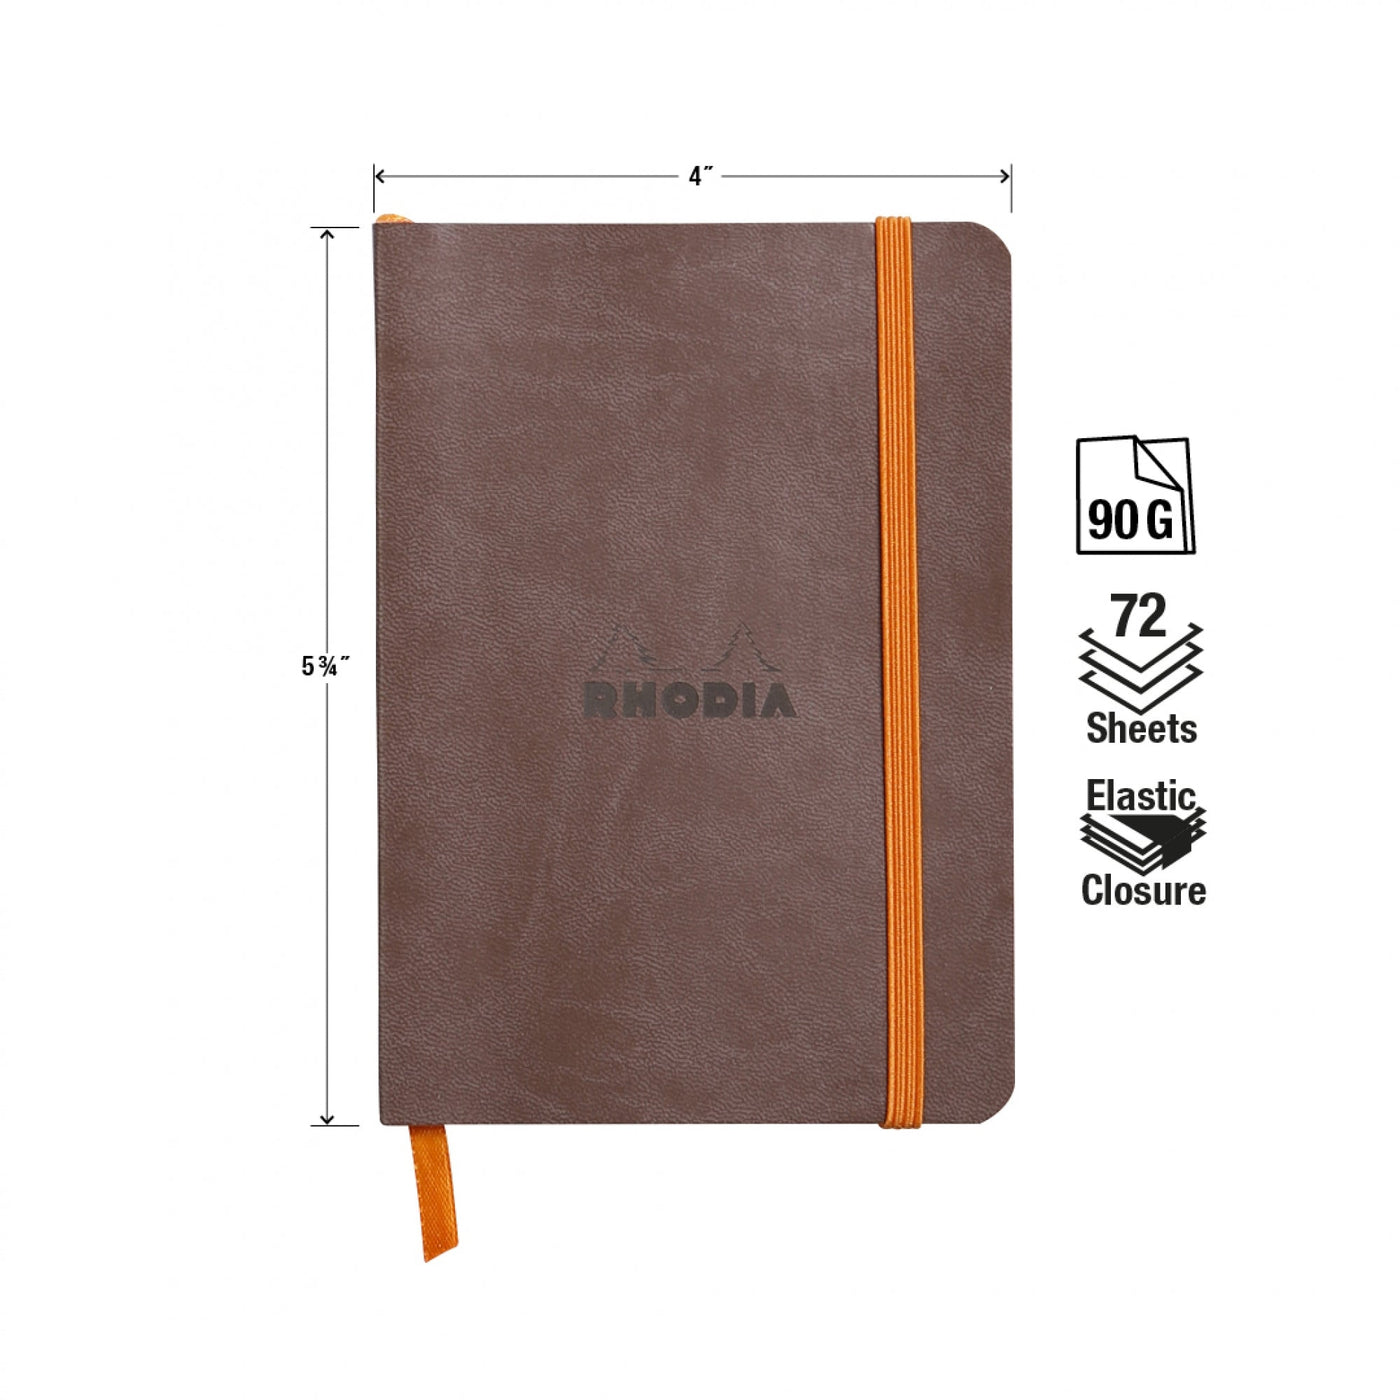 Rhodia Rhodiarama Chocolate A6 Soft Cover Lined Notebook Measurements